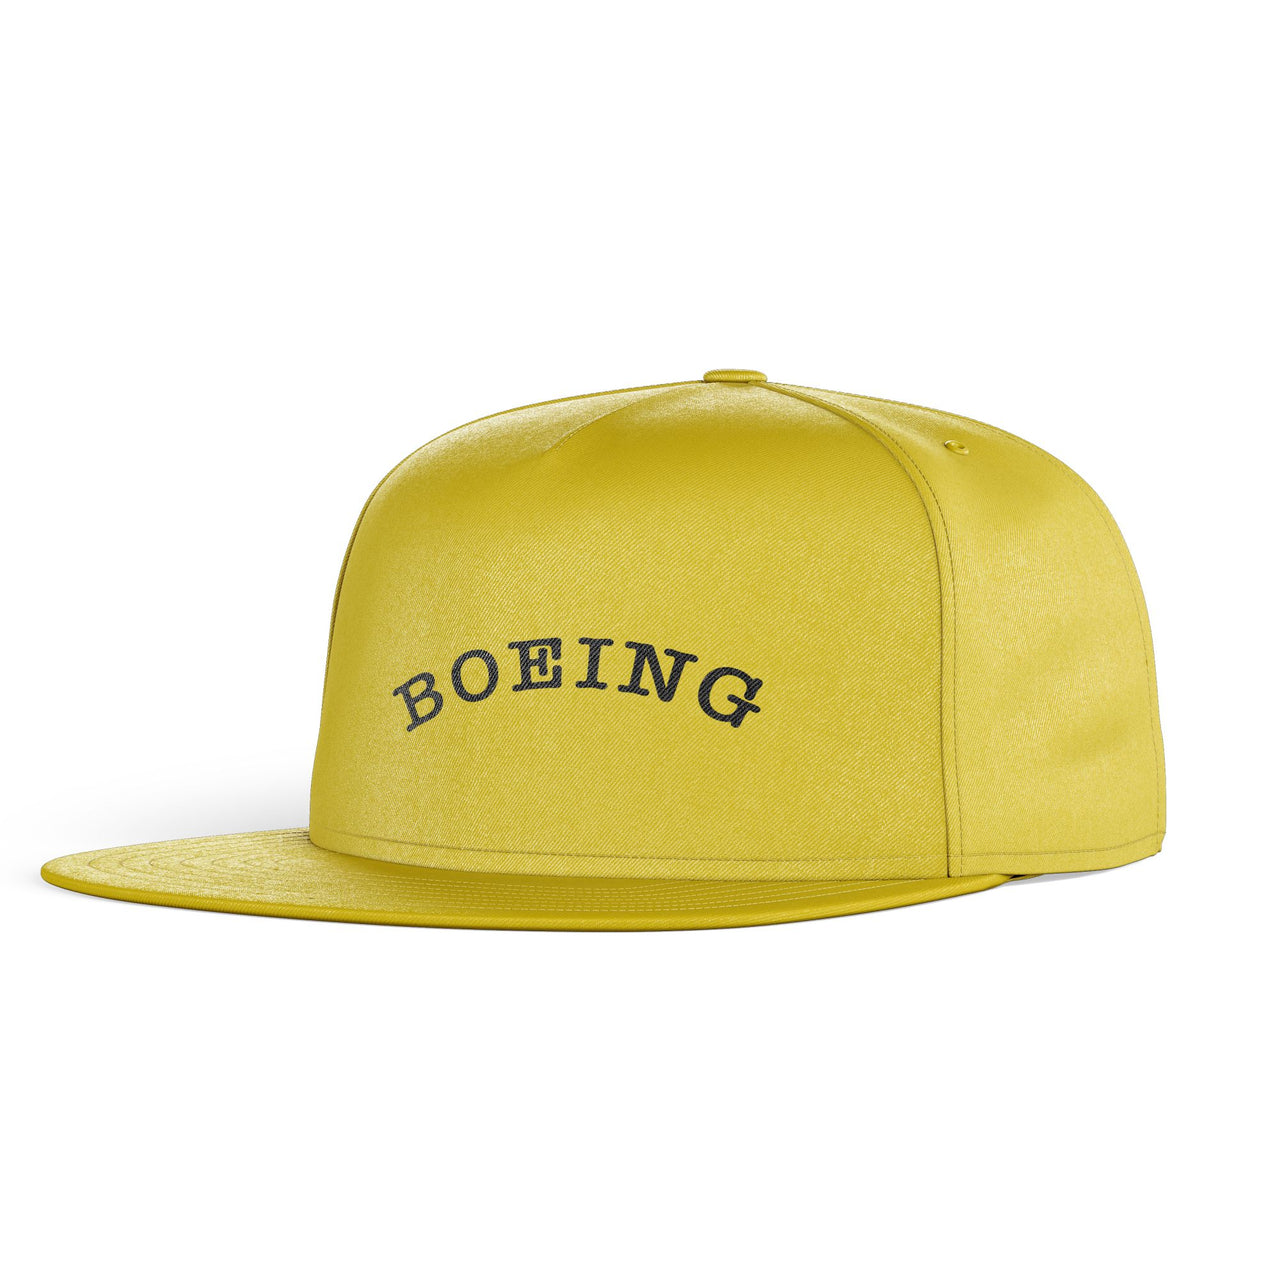 Special BOEING Text Designed Snapback Caps & Hats